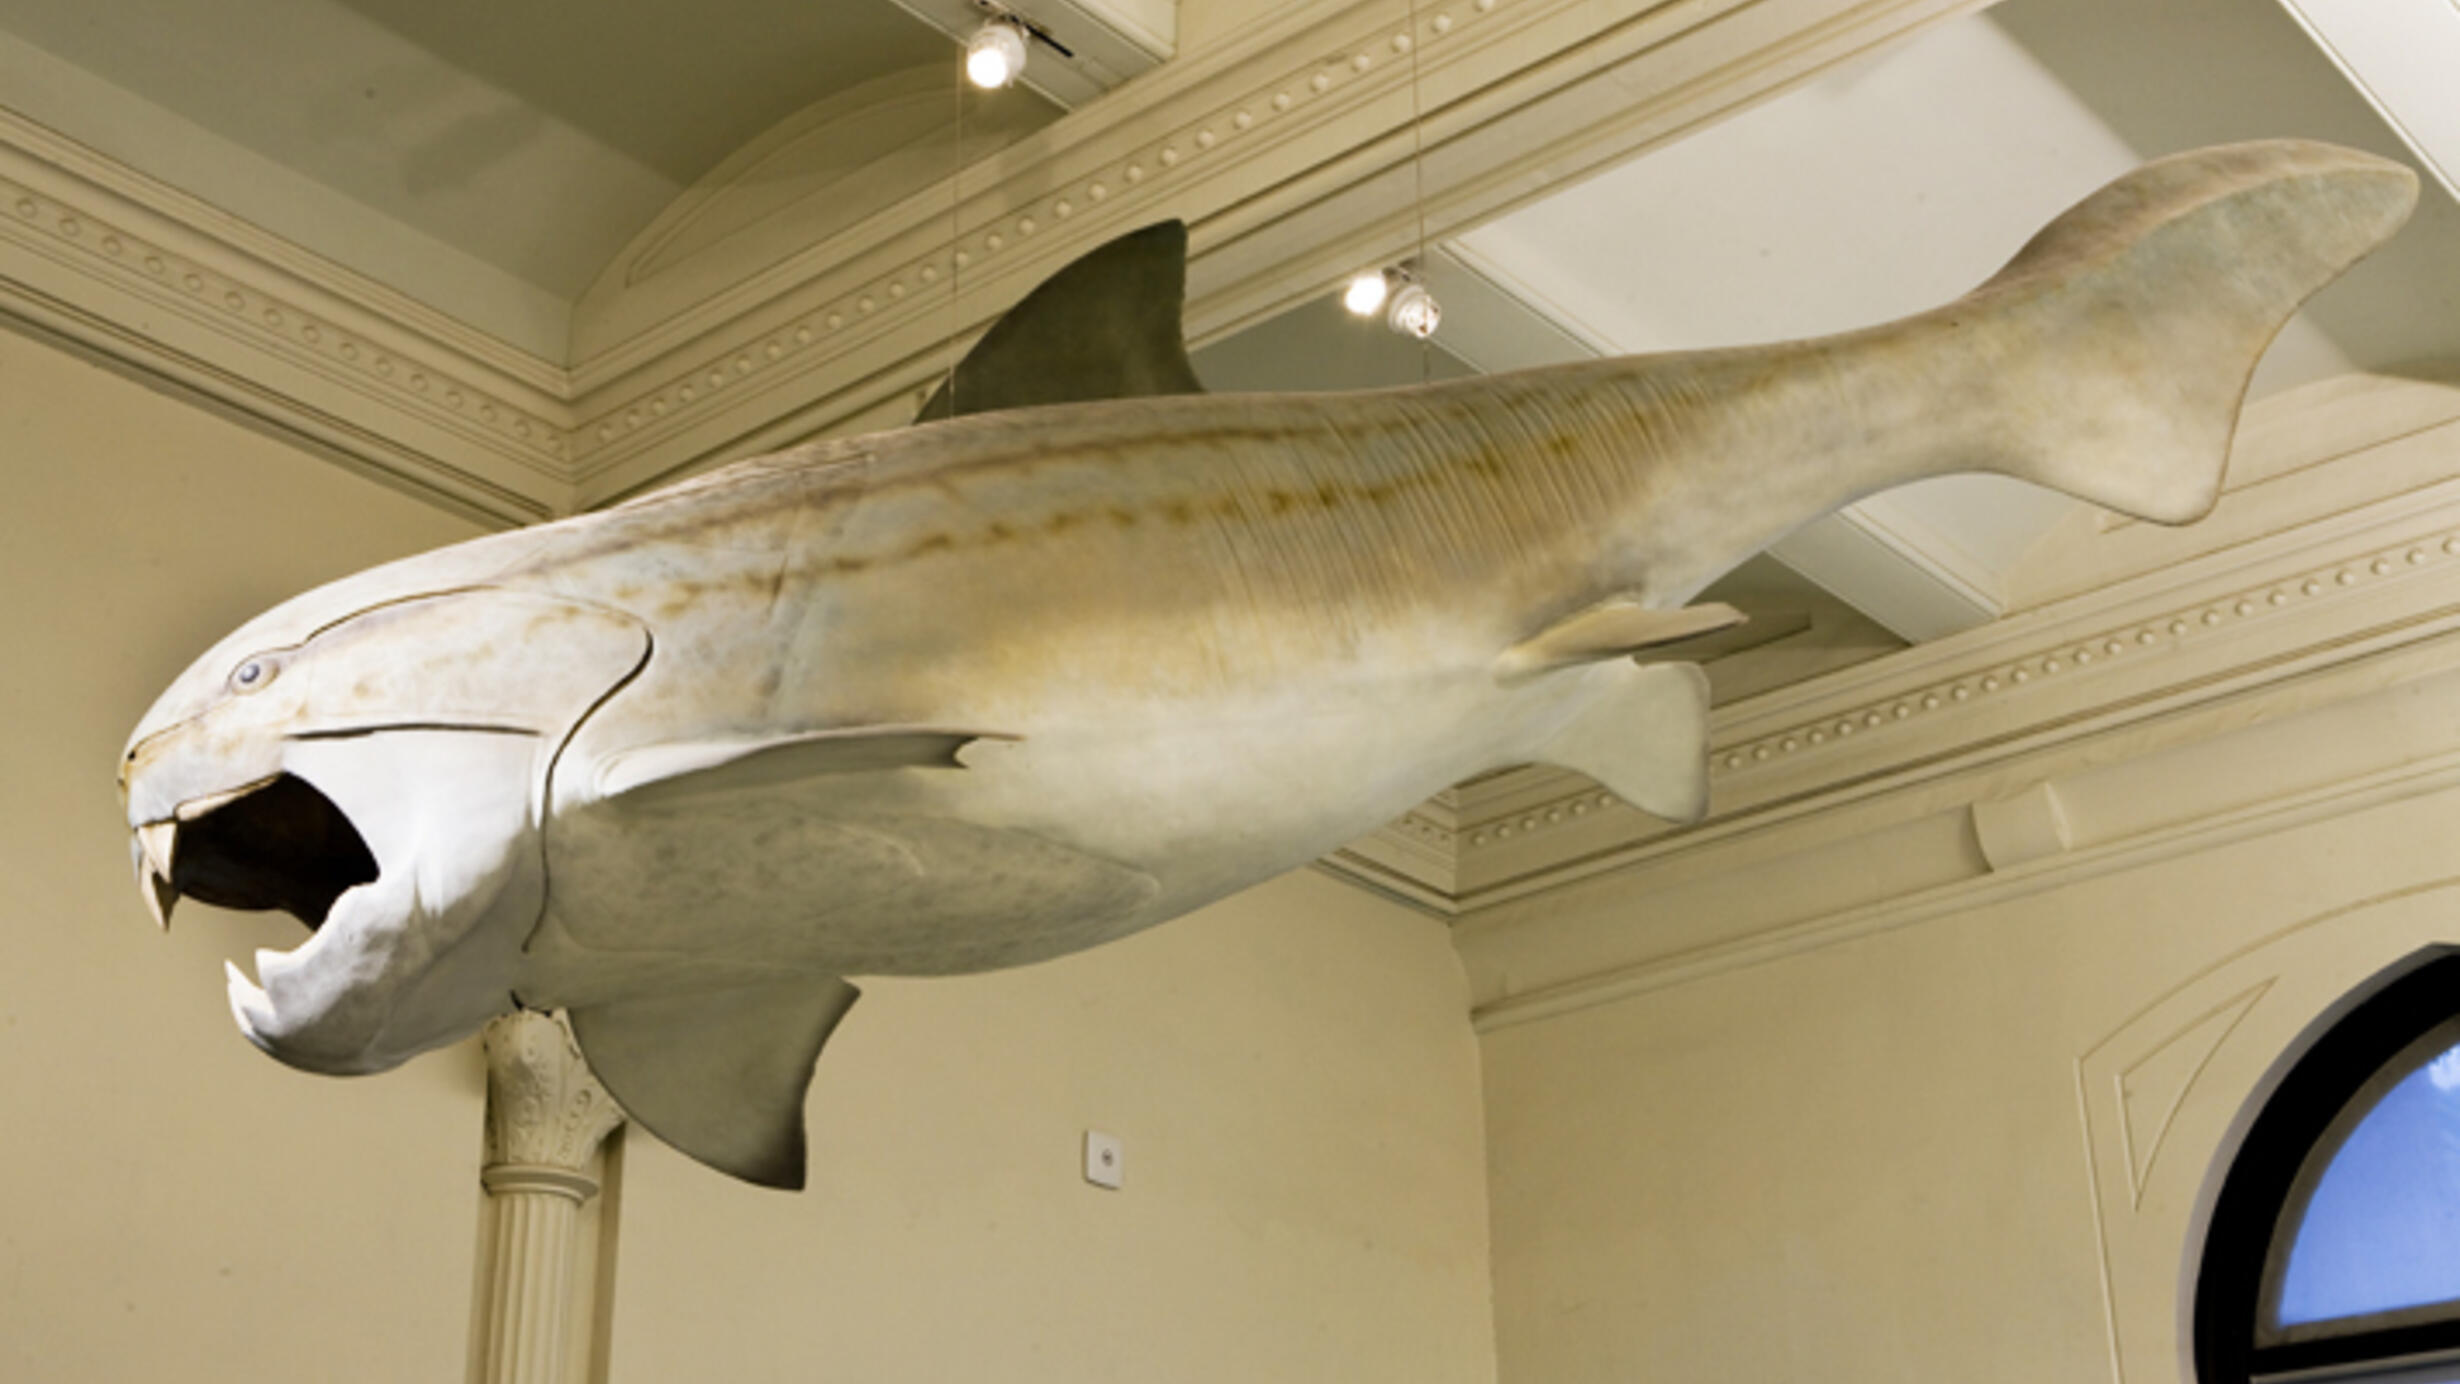 Suspended from the ceiling in the Museum’s Hall of Vertebrate Origins, a model of a Dunkleosteus terrelli. Its open jaw shows its razor-sharp edges.